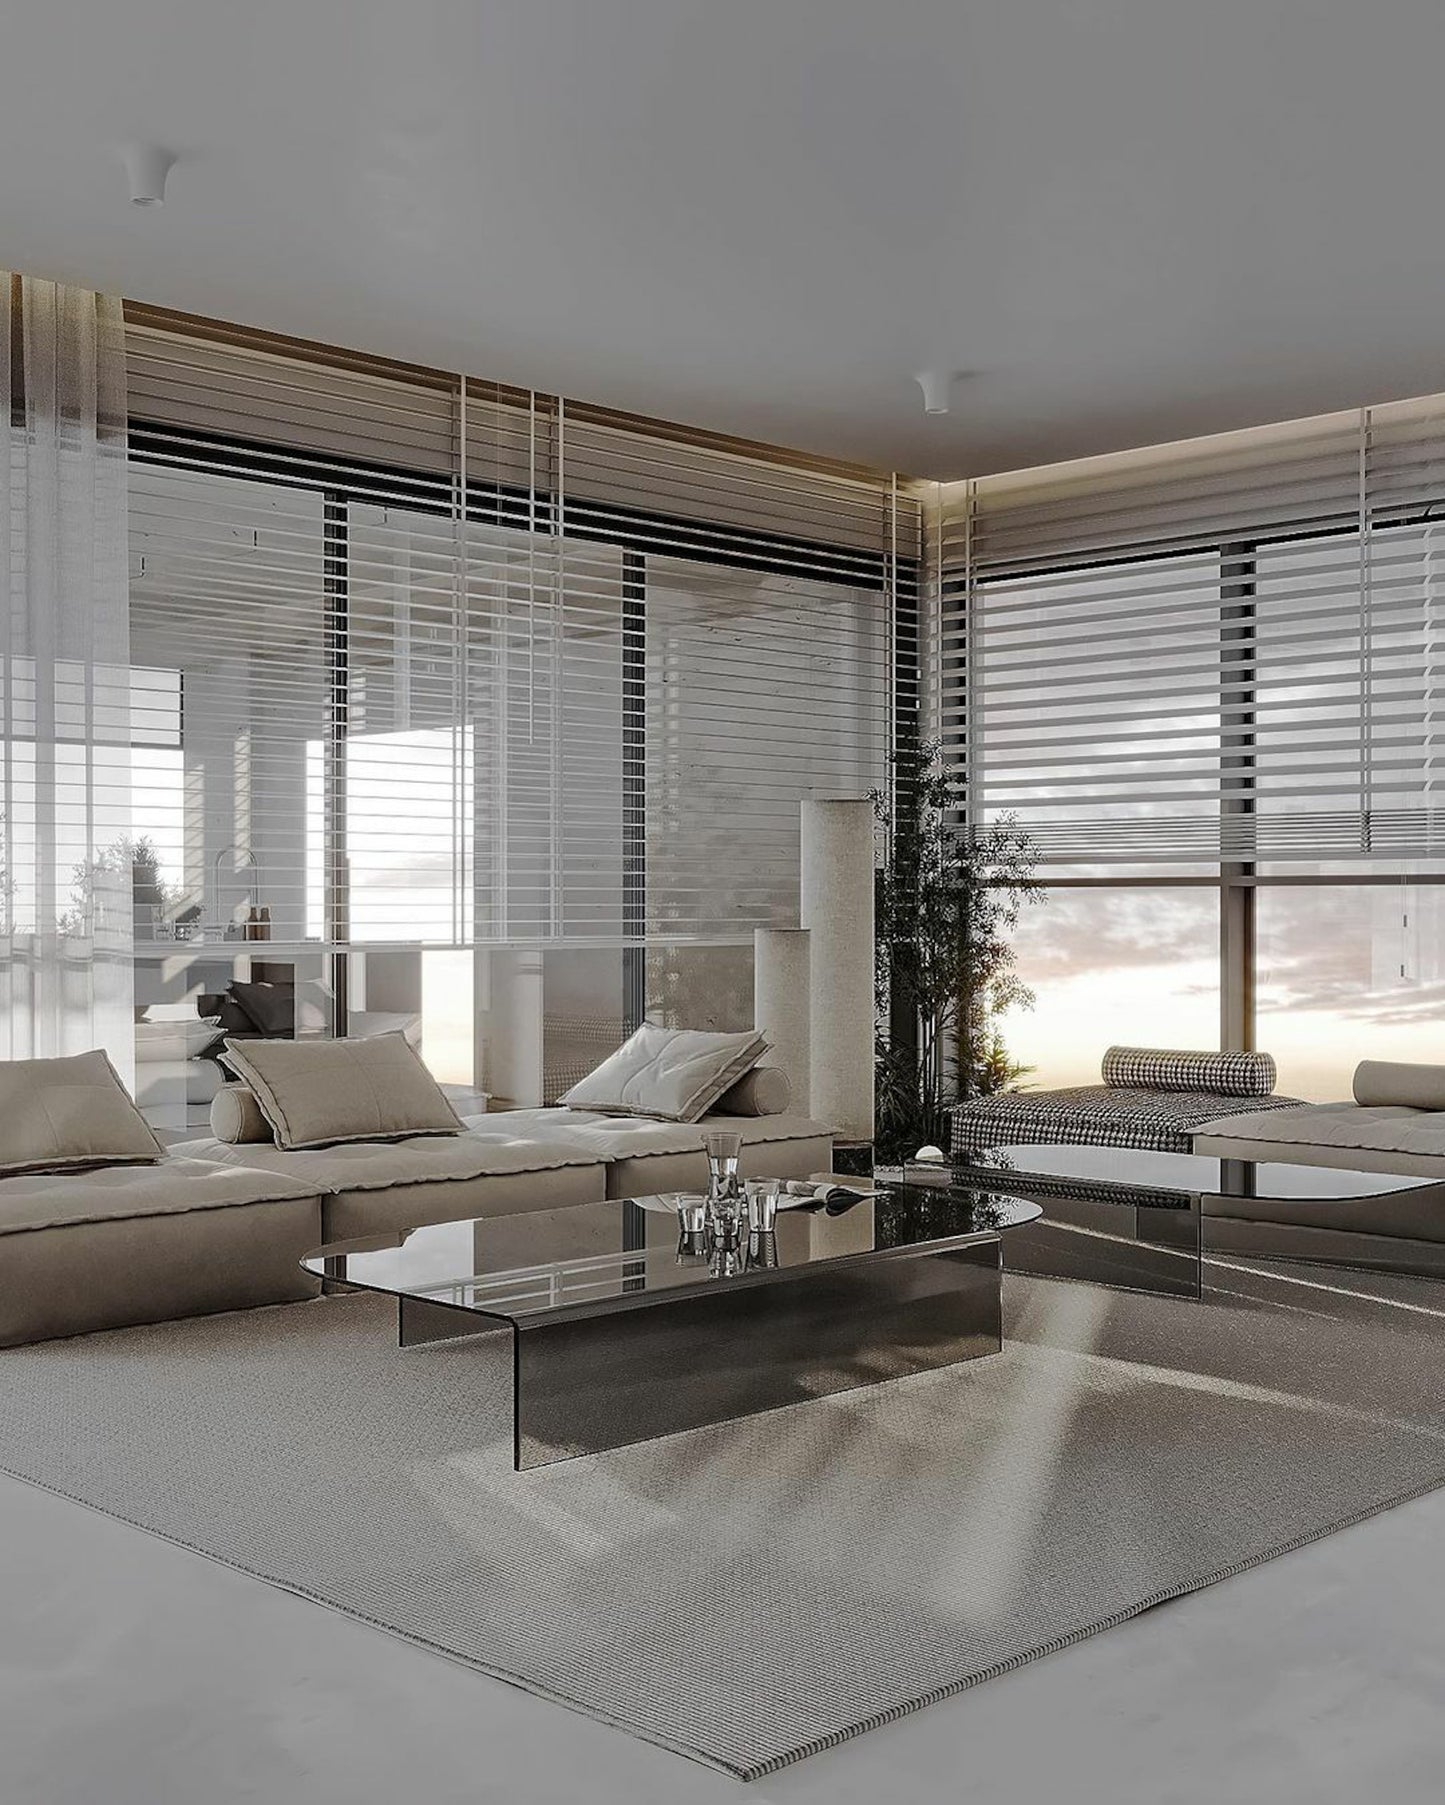 modern living room interior design with windows curtains sofa wooden round table ceiling light